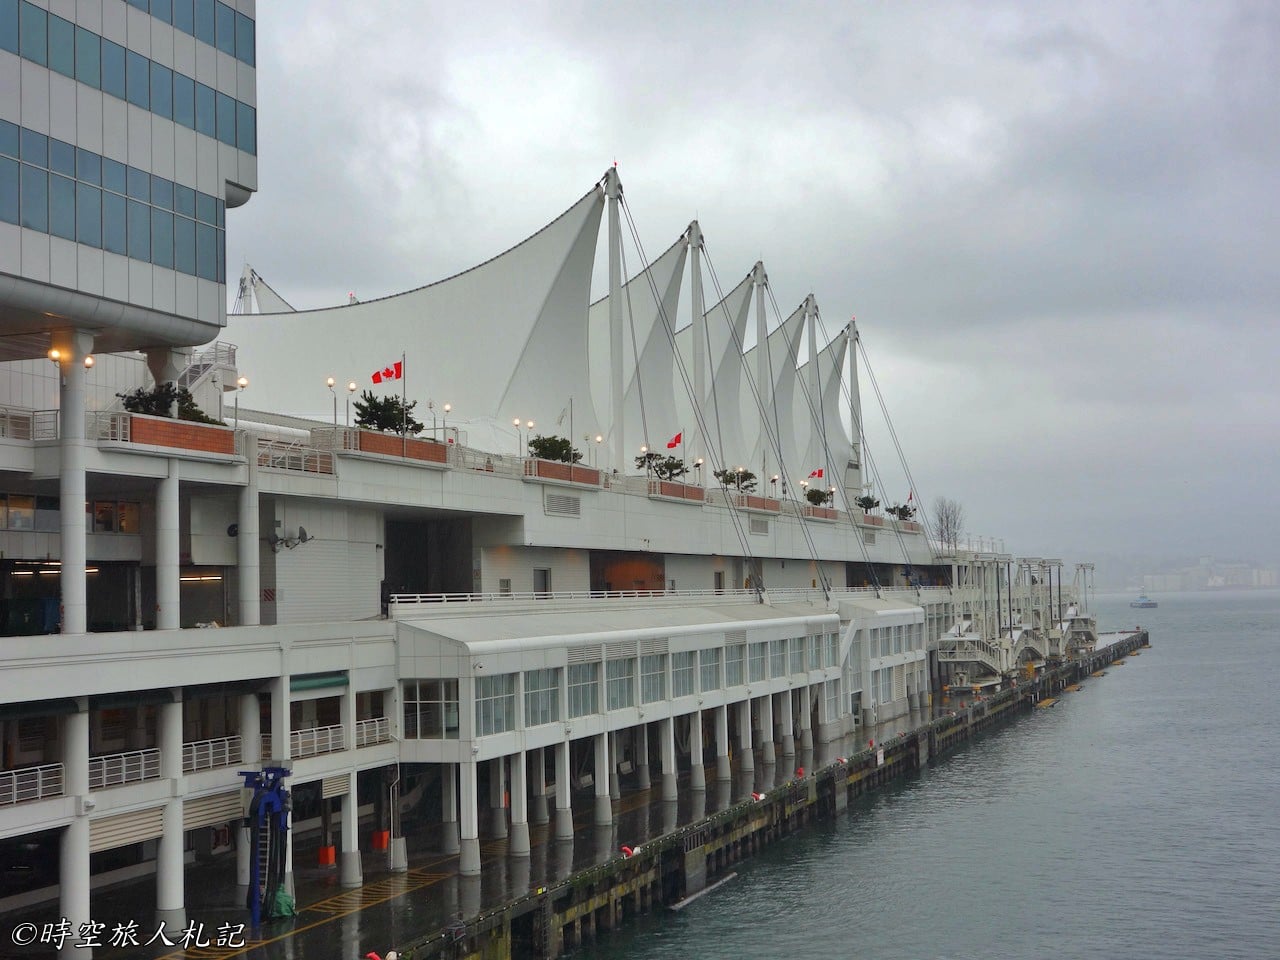 Canada place, Waterfront, Vancouver, Canada